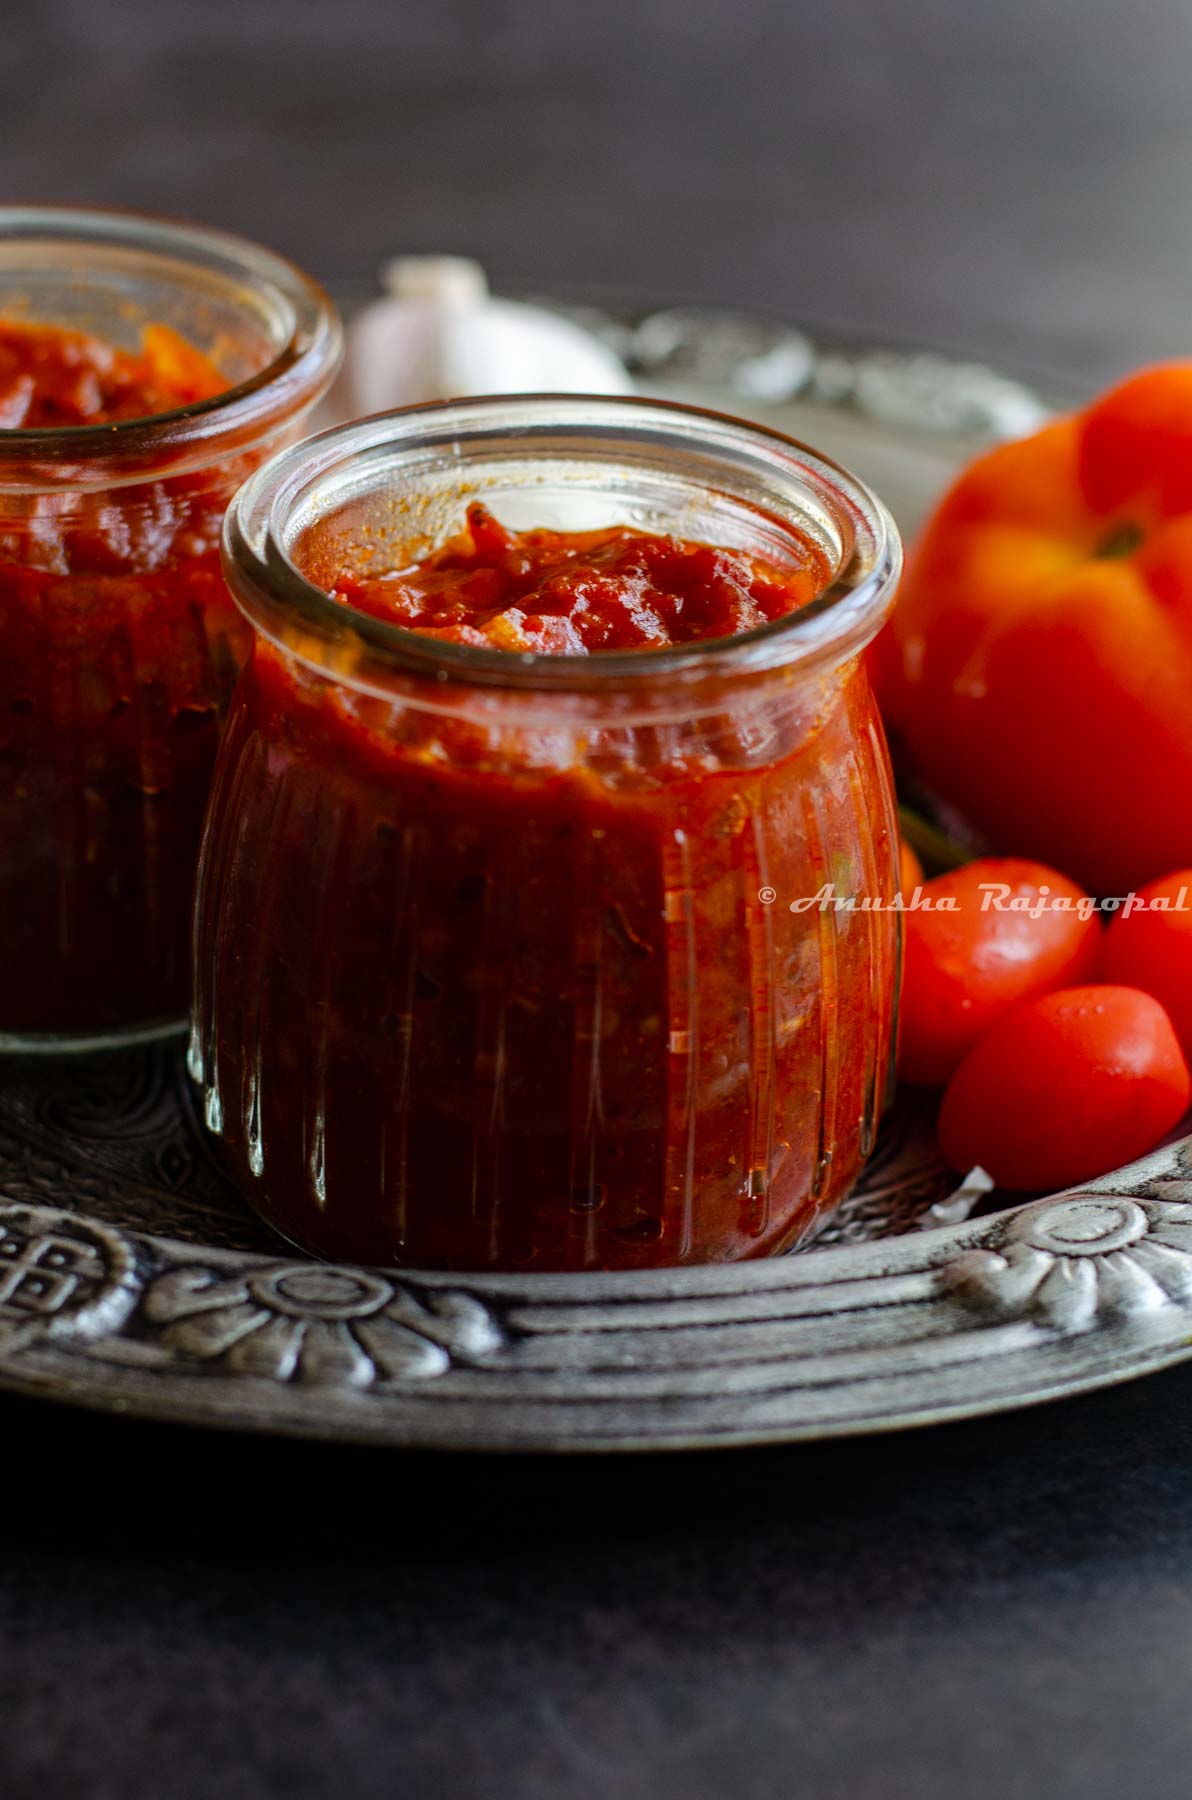 South Indian thakkali thokku- a tangy tomato relish in a glass jar with cherry tomatoes, garlic and curry leaves all presented in a rustic platter